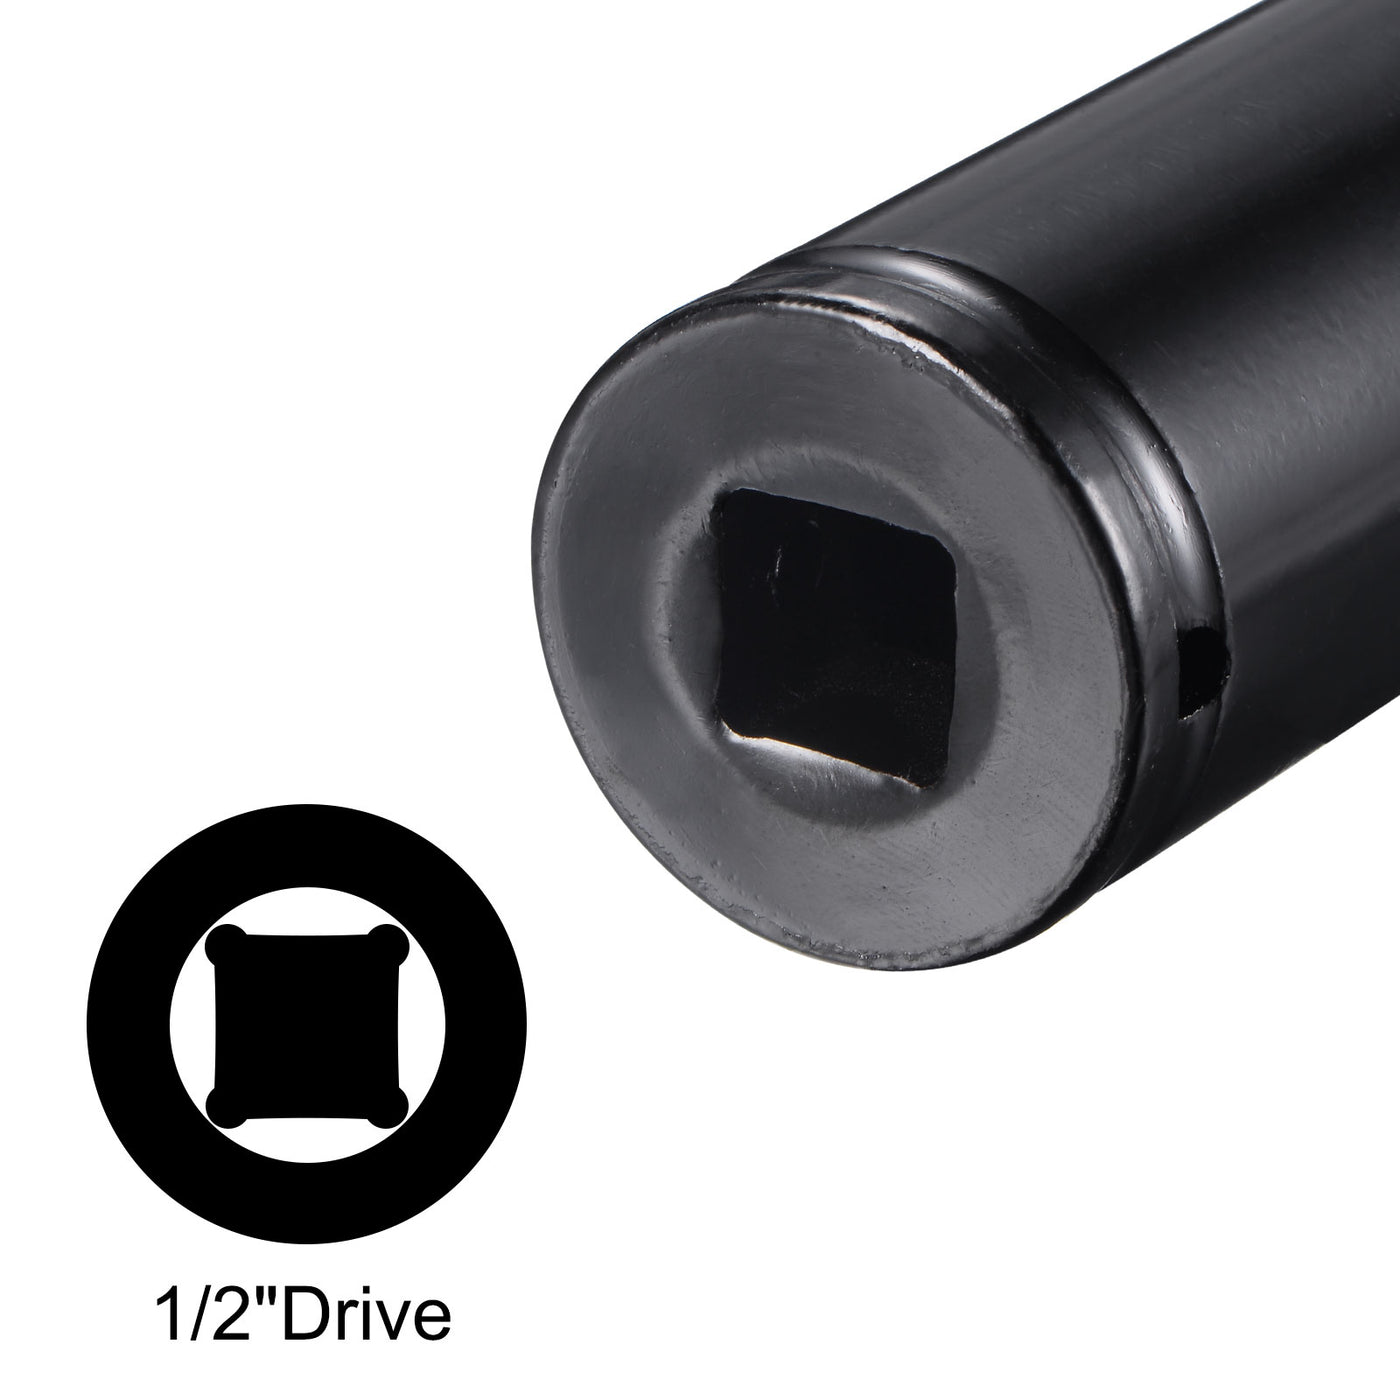 uxcell Uxcell Deep Impact Socket, CR-V Steel 6-Point Metric Sizes